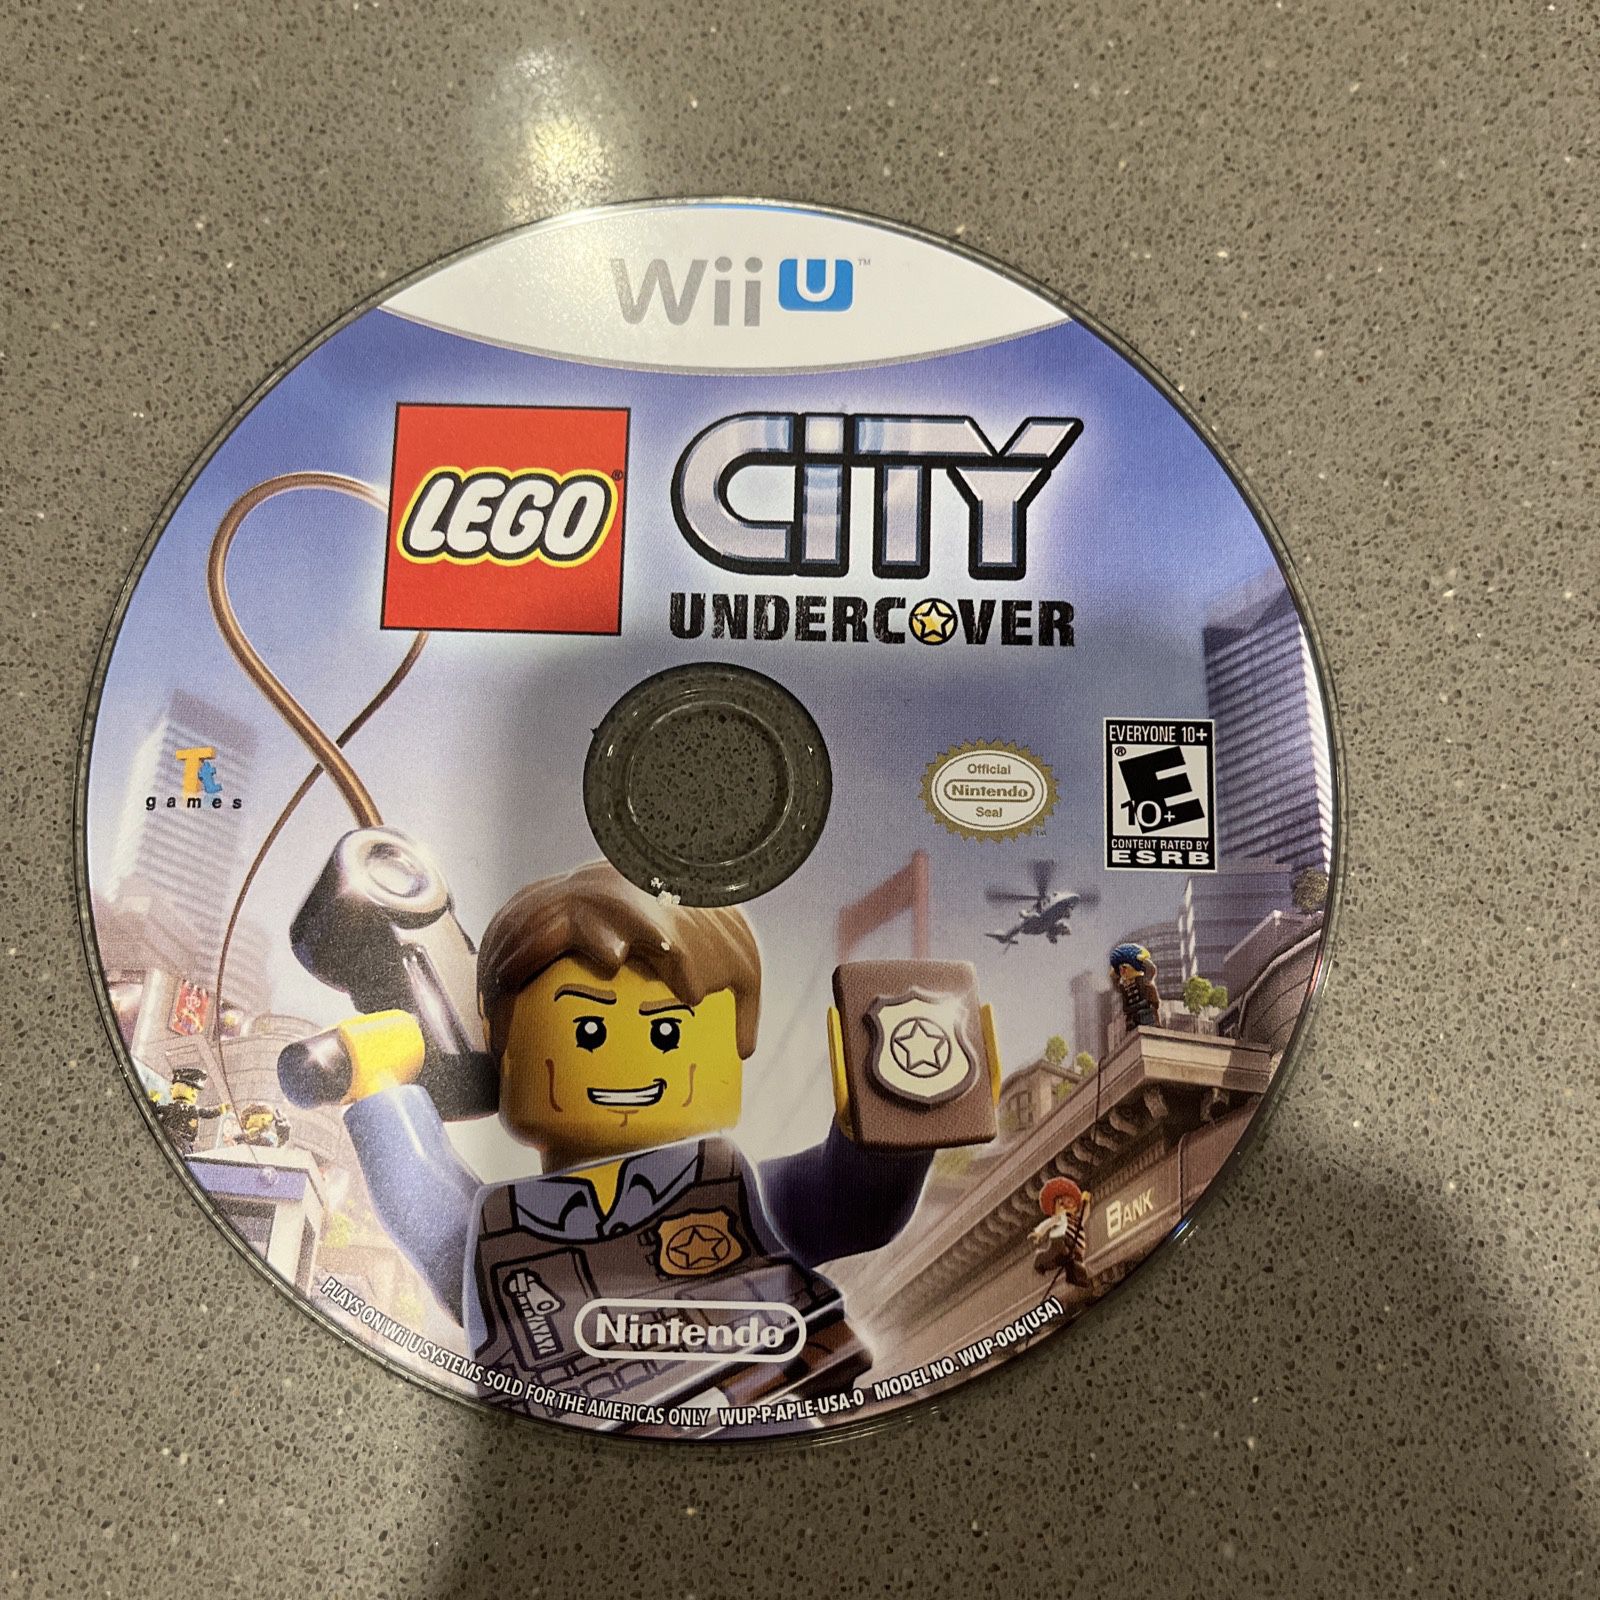 LEGO City Undercover (Nintendo Wii U, 2013) Disc Only